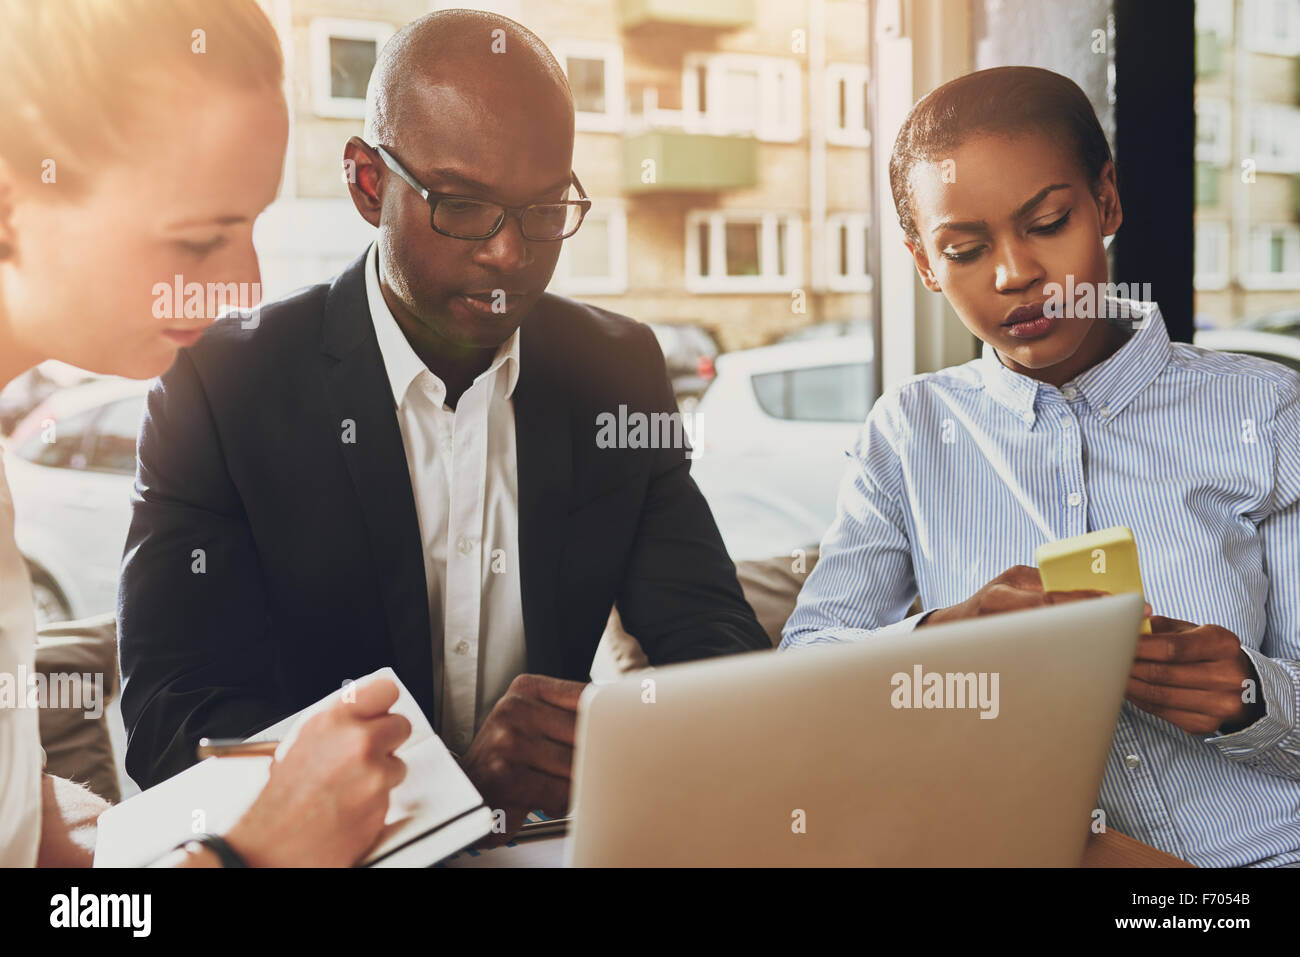 Business partners working, multi ethnic group of people, small office Stock Photo